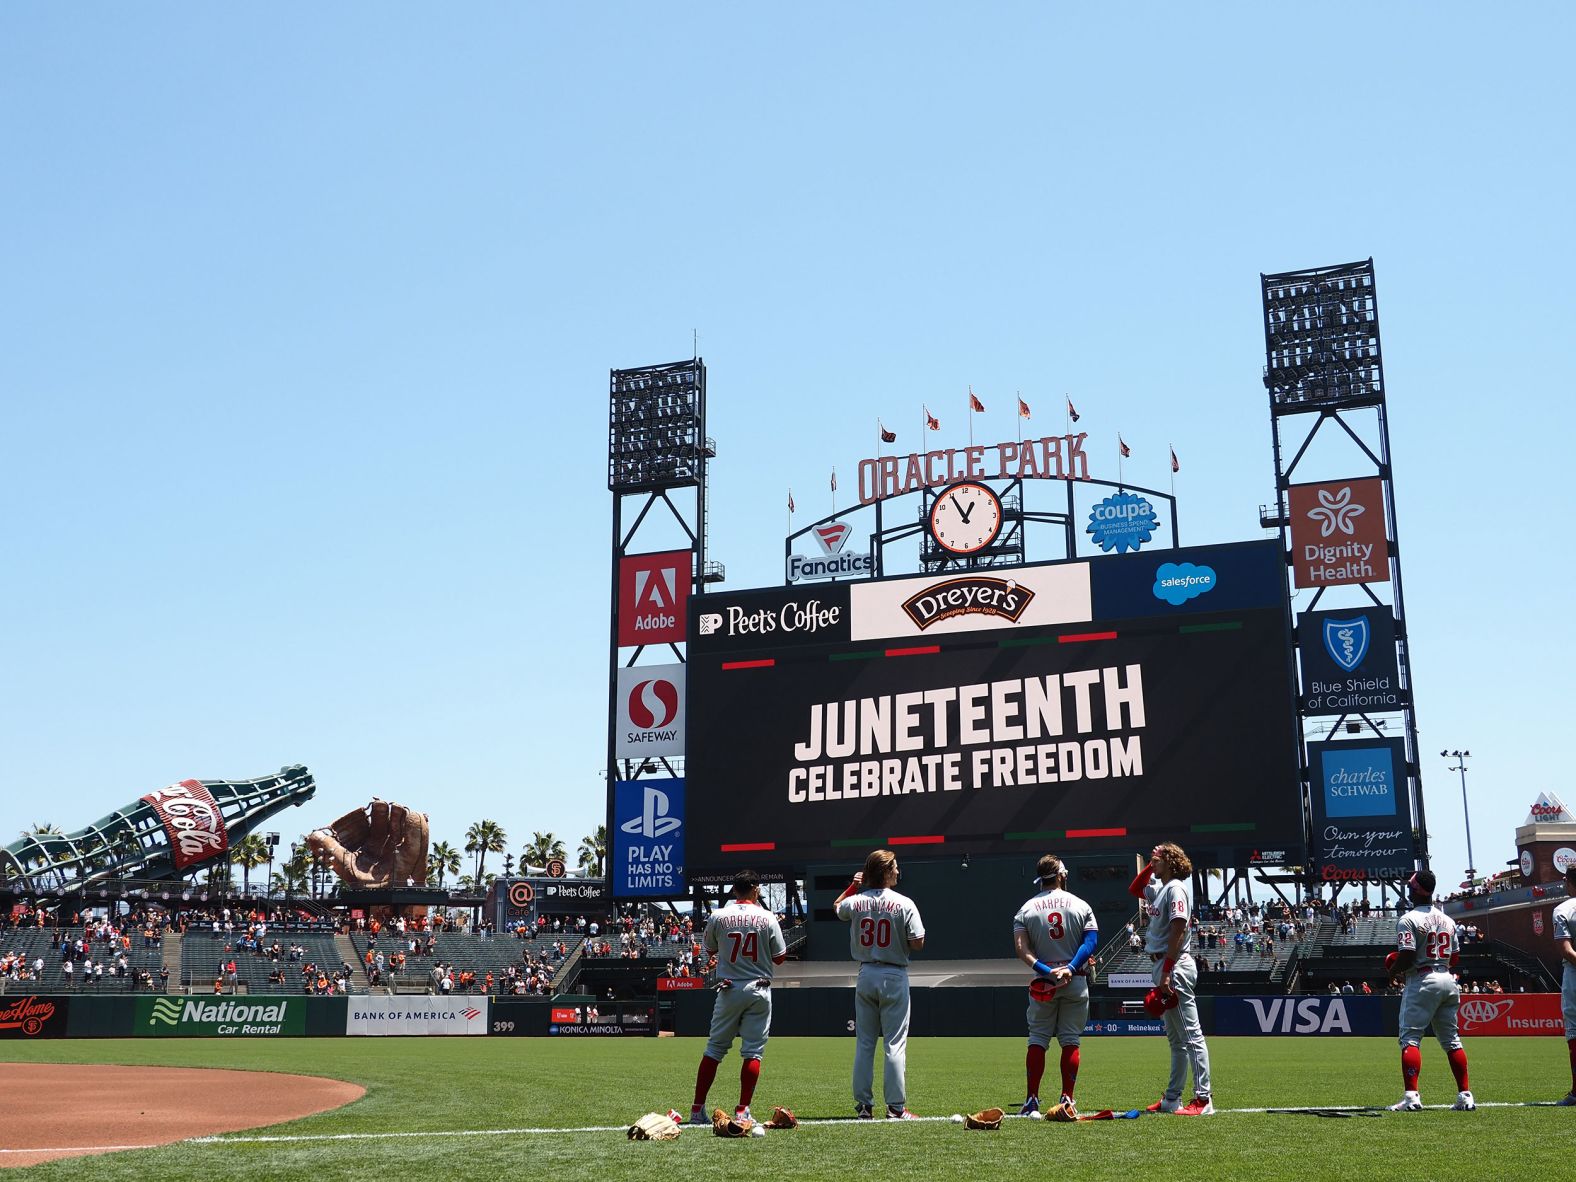 The scoreboard displays signage for Juneteenth before a game between the Philadelphia Phillies and San Francisco Giants at Oracle Park in San Francisco.